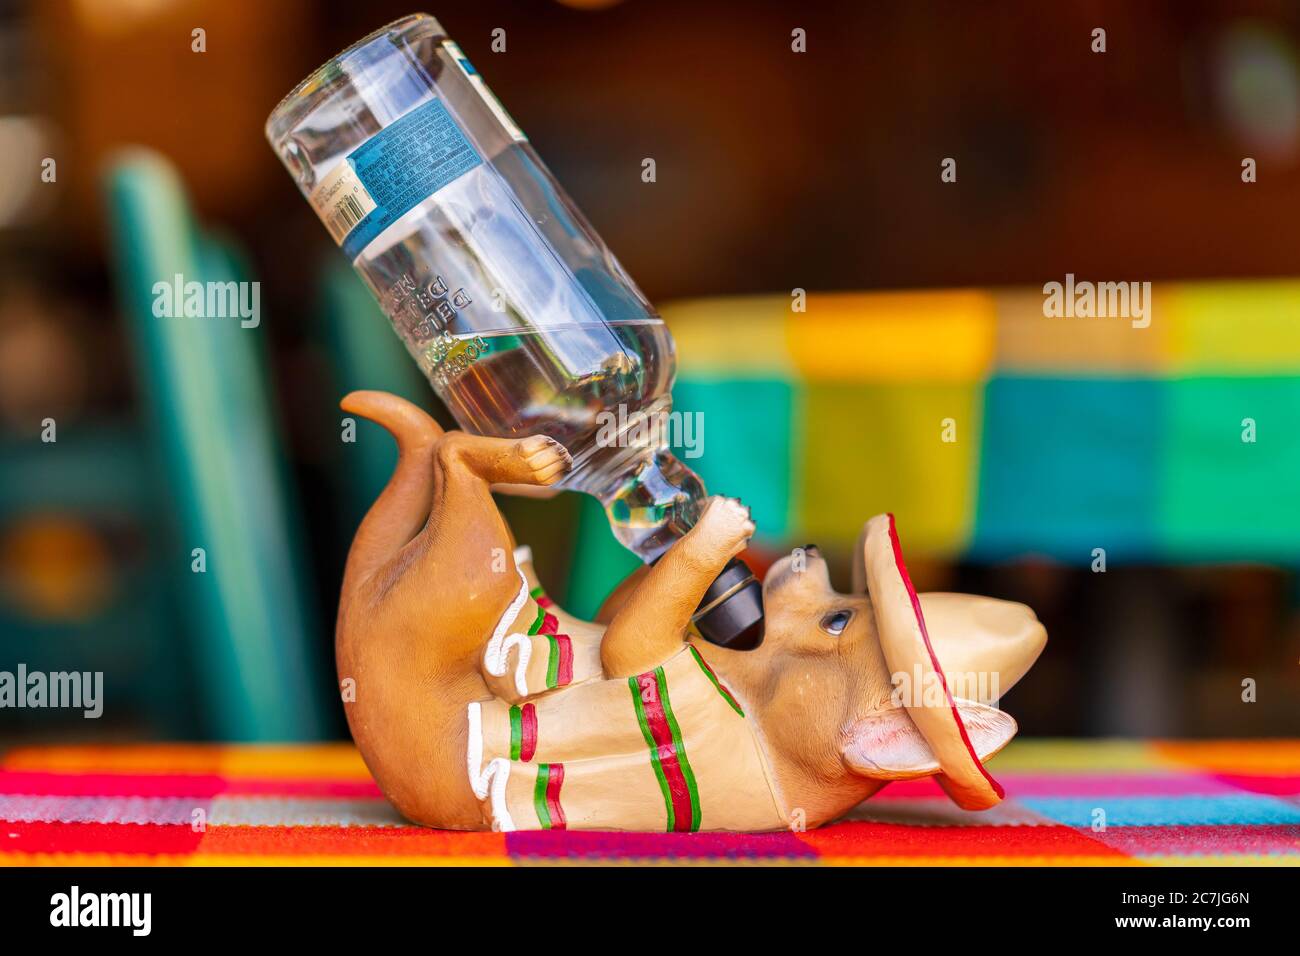 Adorable Chihuahua Figurine with a Mexican Sombrero and Poncho Drinking Alcohol. Stock Photo